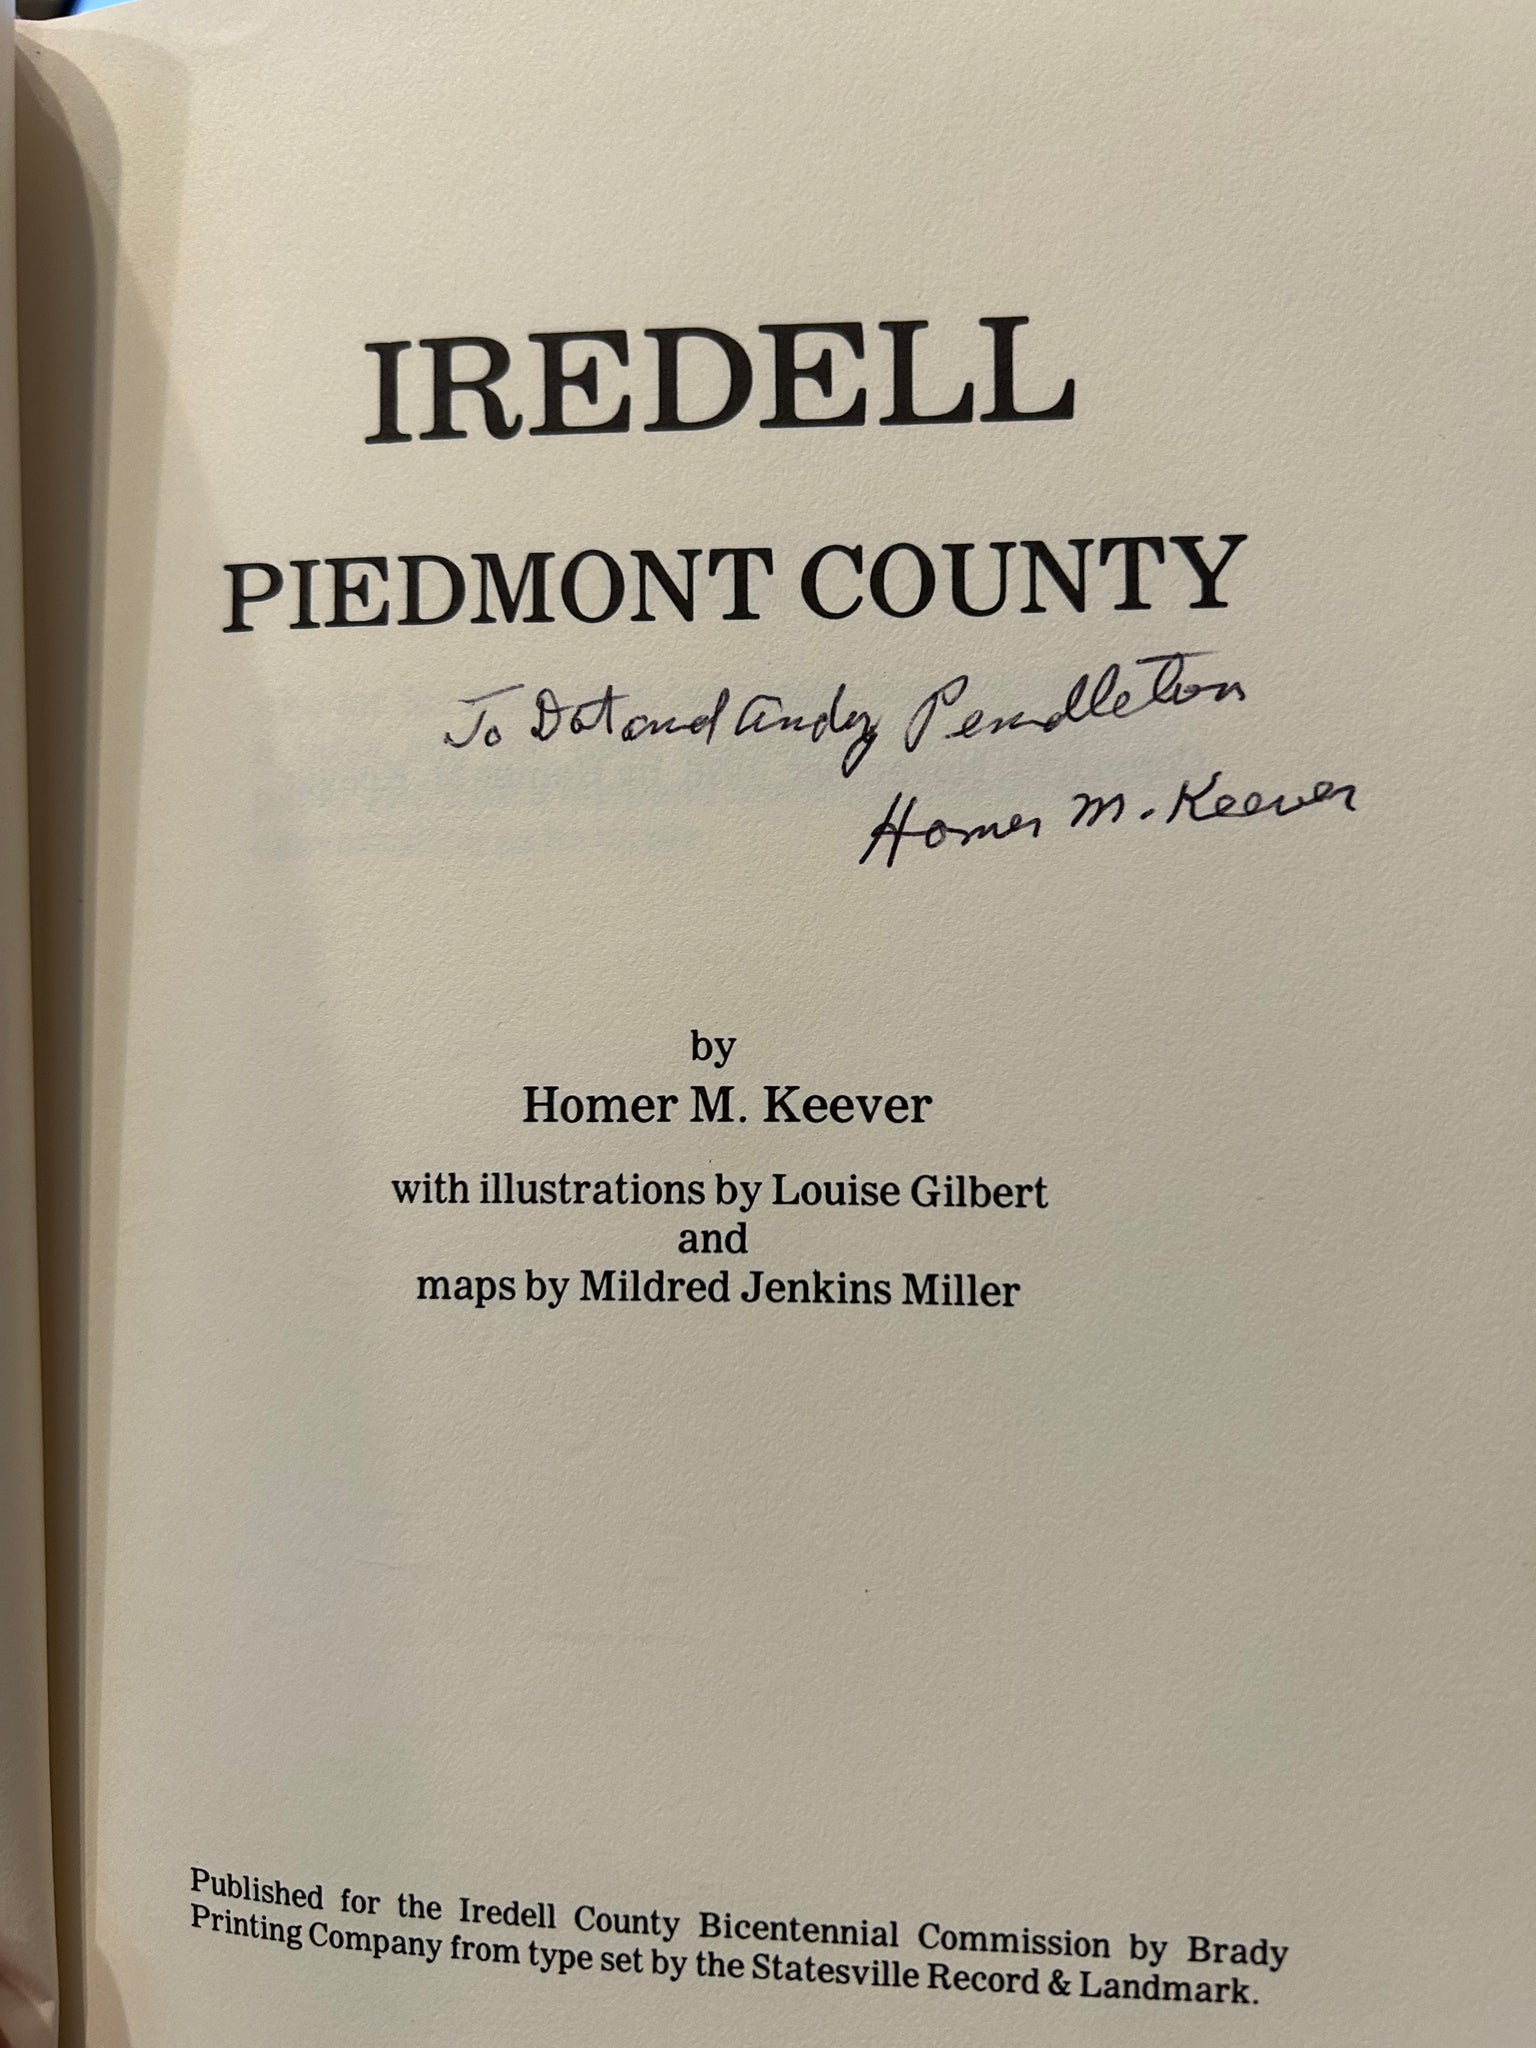 Iredell-Piedmont County